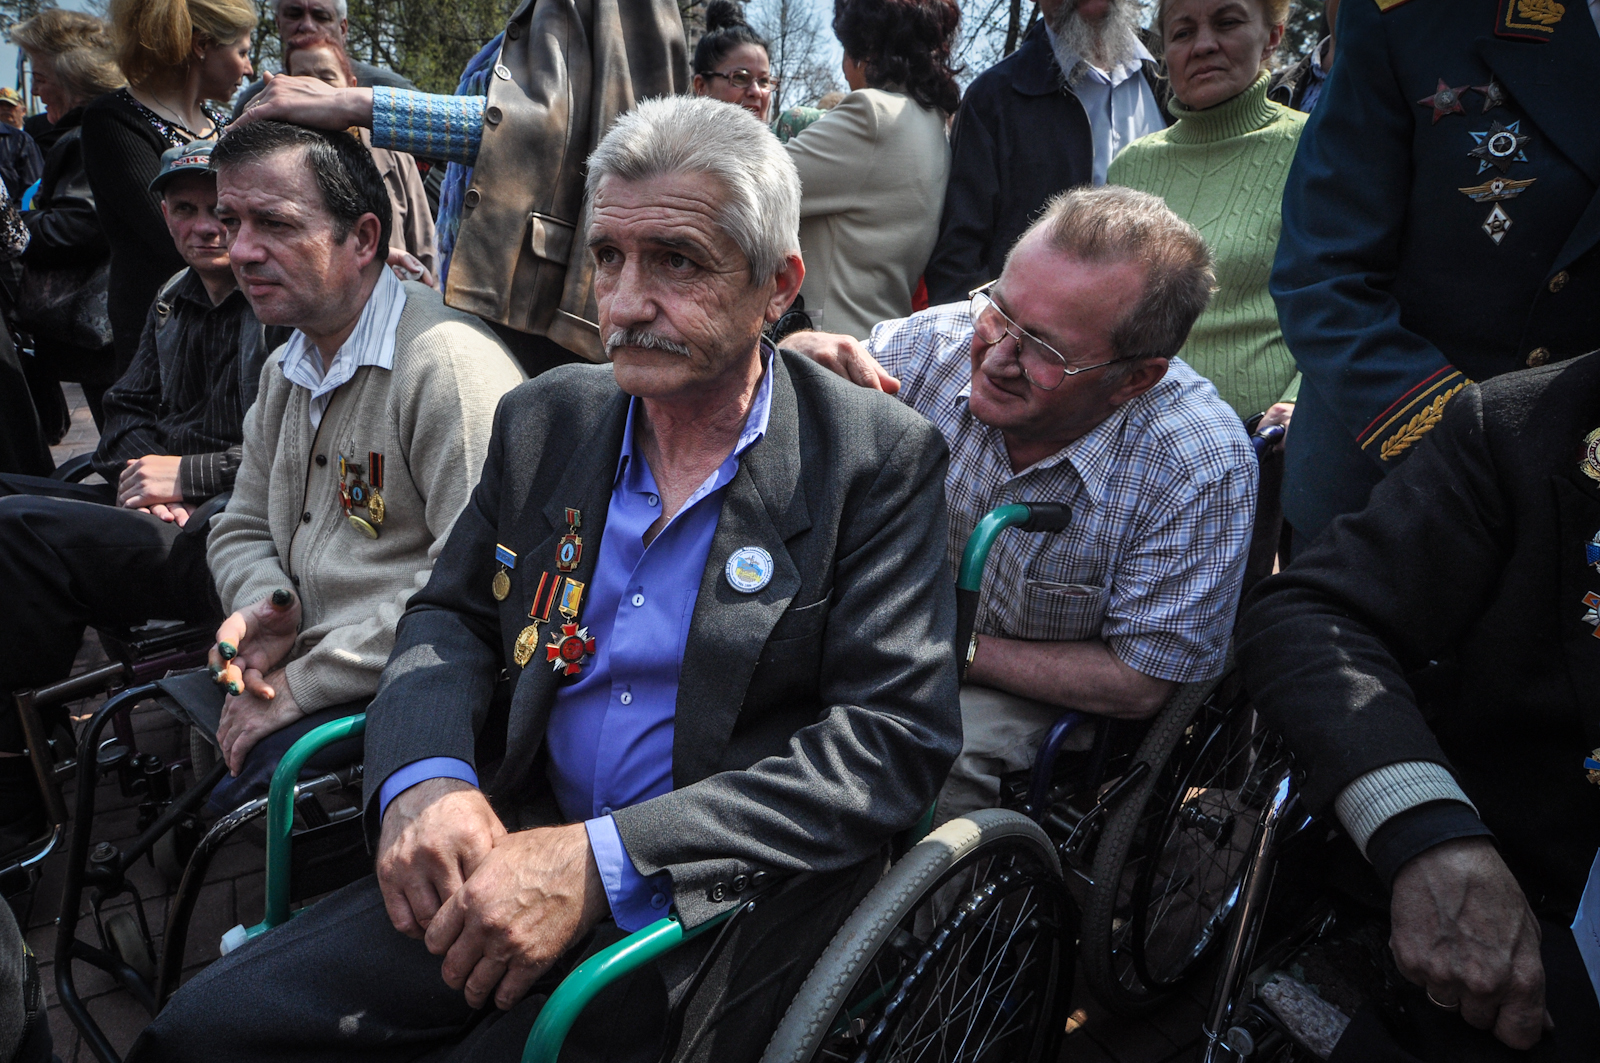 Disabled liquidators at a memorial to the Chernobyl disaster. Many feel abandoned by the State, receiving little or no compensation